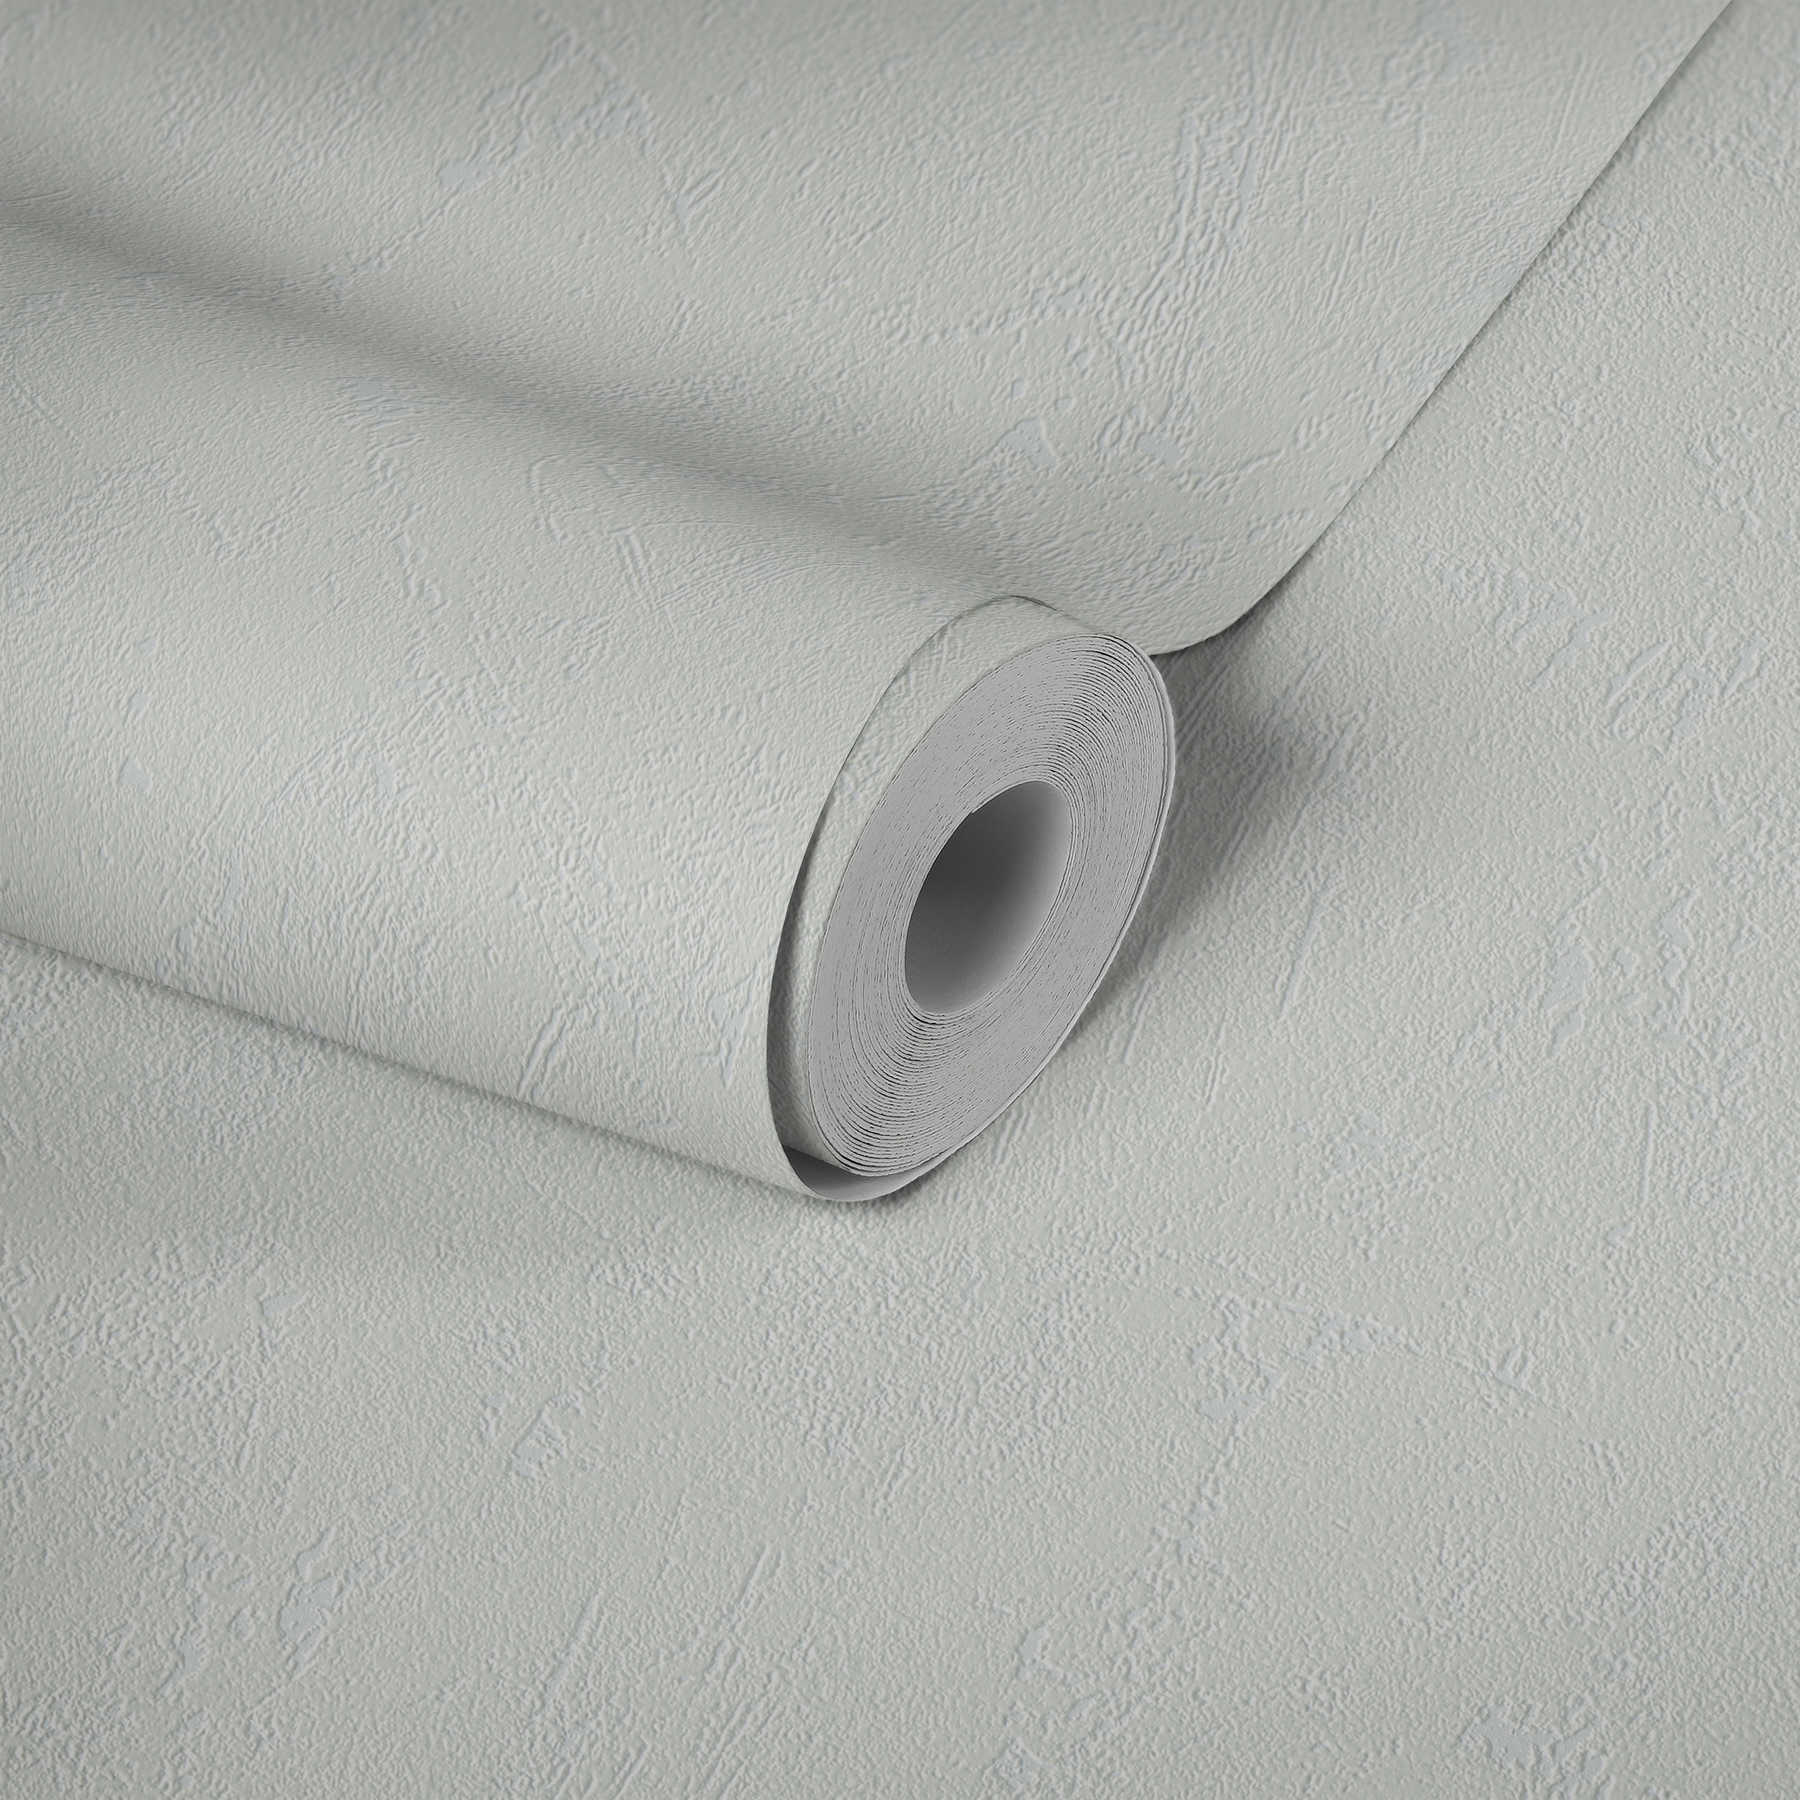             Non-woven wallpaper paintable with wall plaster structure
        